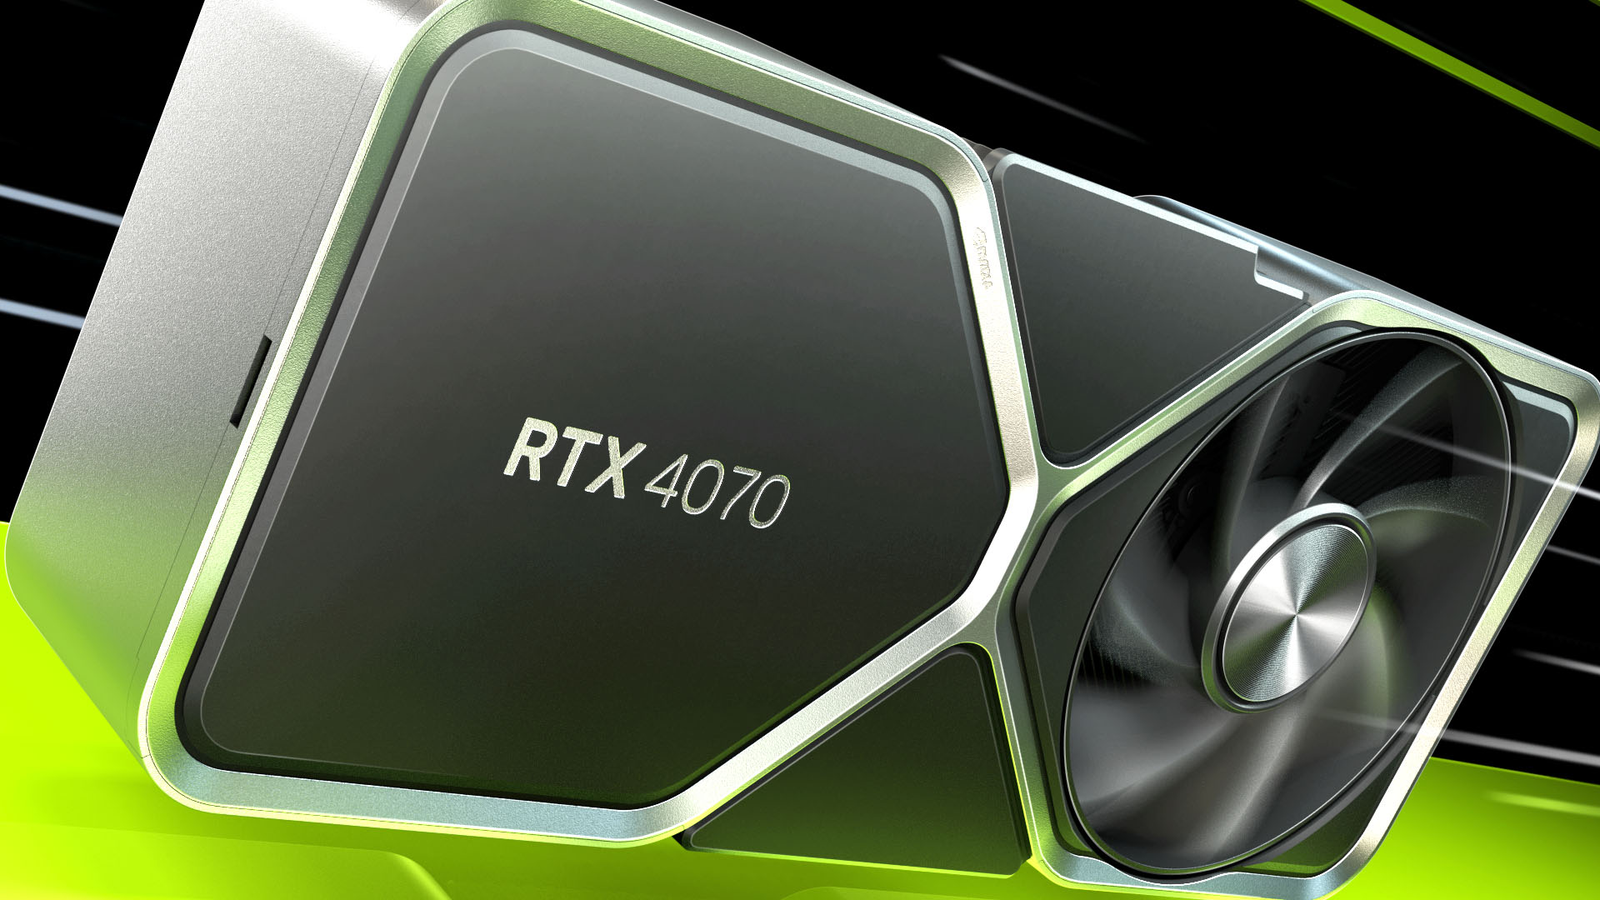 Nvidia GeForce RTX 4070 Vs RTX 3080 And RX 6800 XT: Which Should